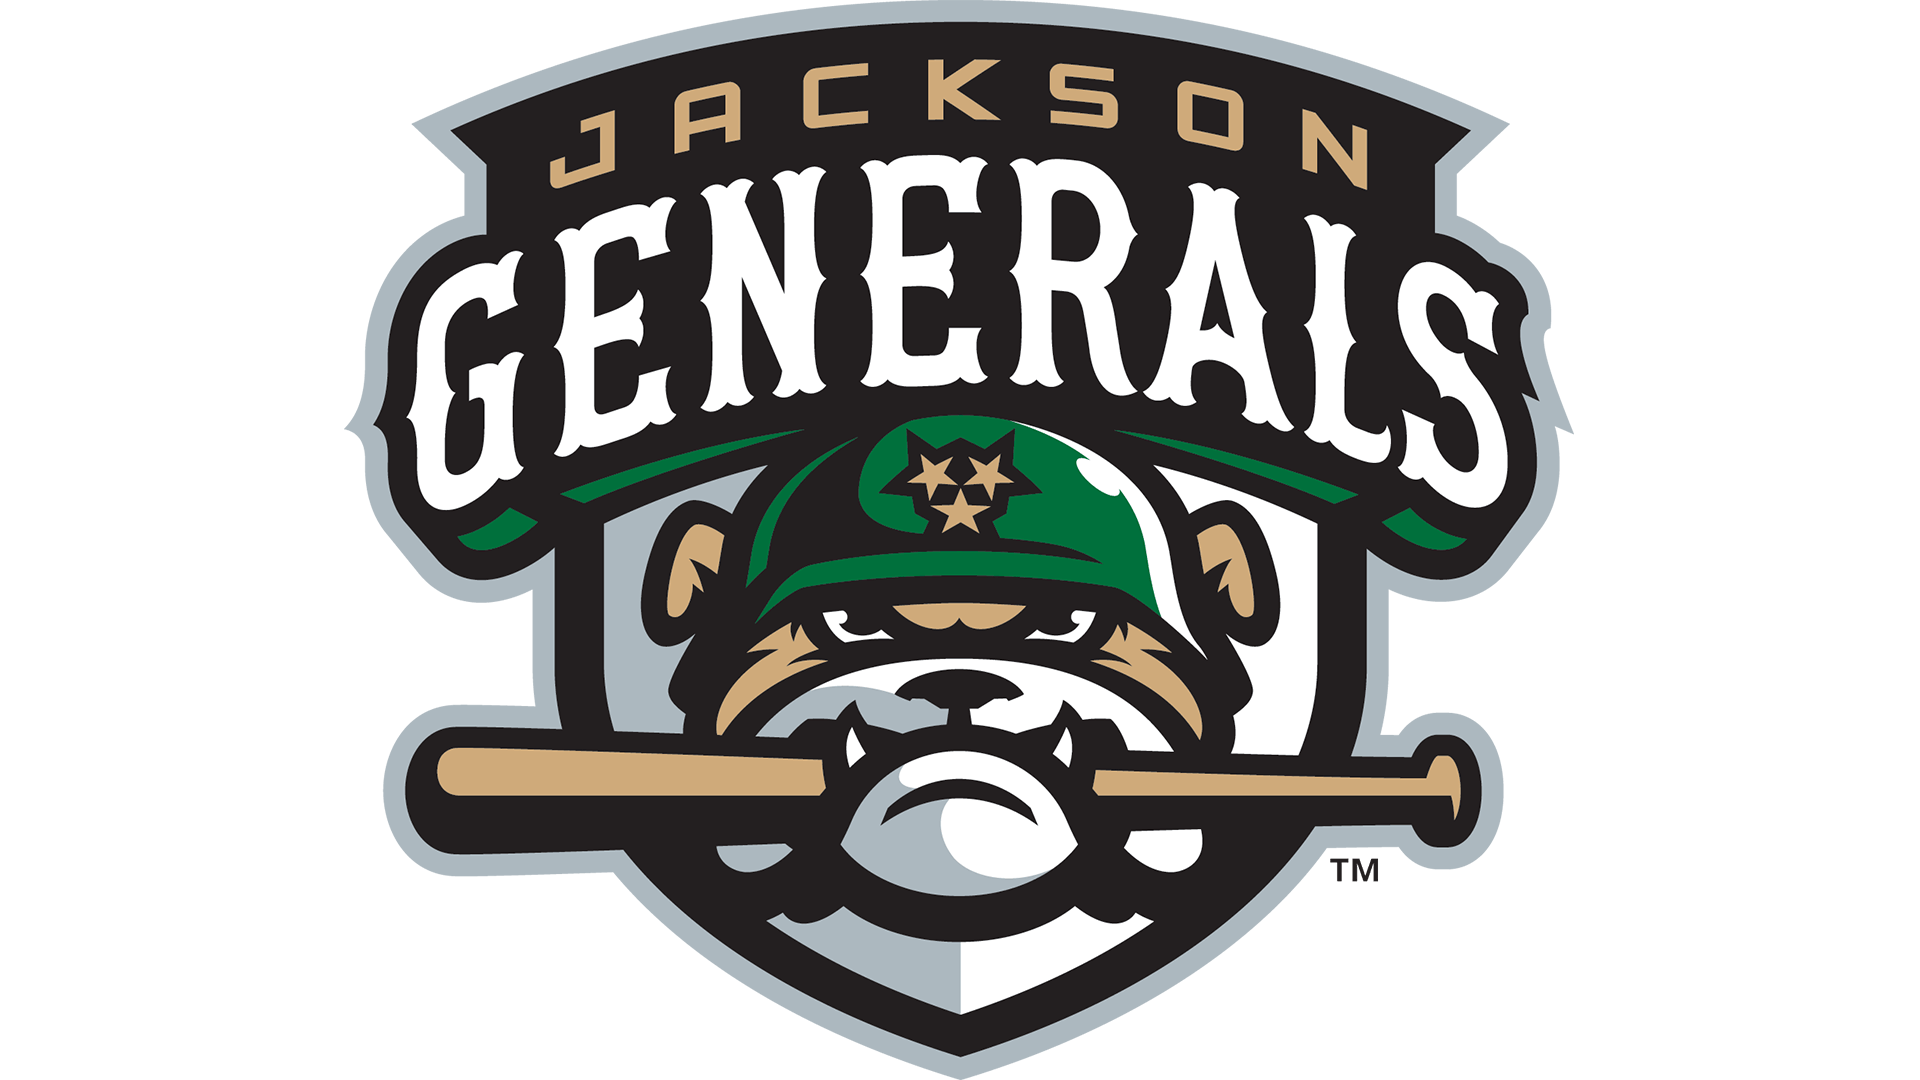 Generals Logo - Jackson Generals logo, Jackson Generals Symbol, Meaning, History and ...